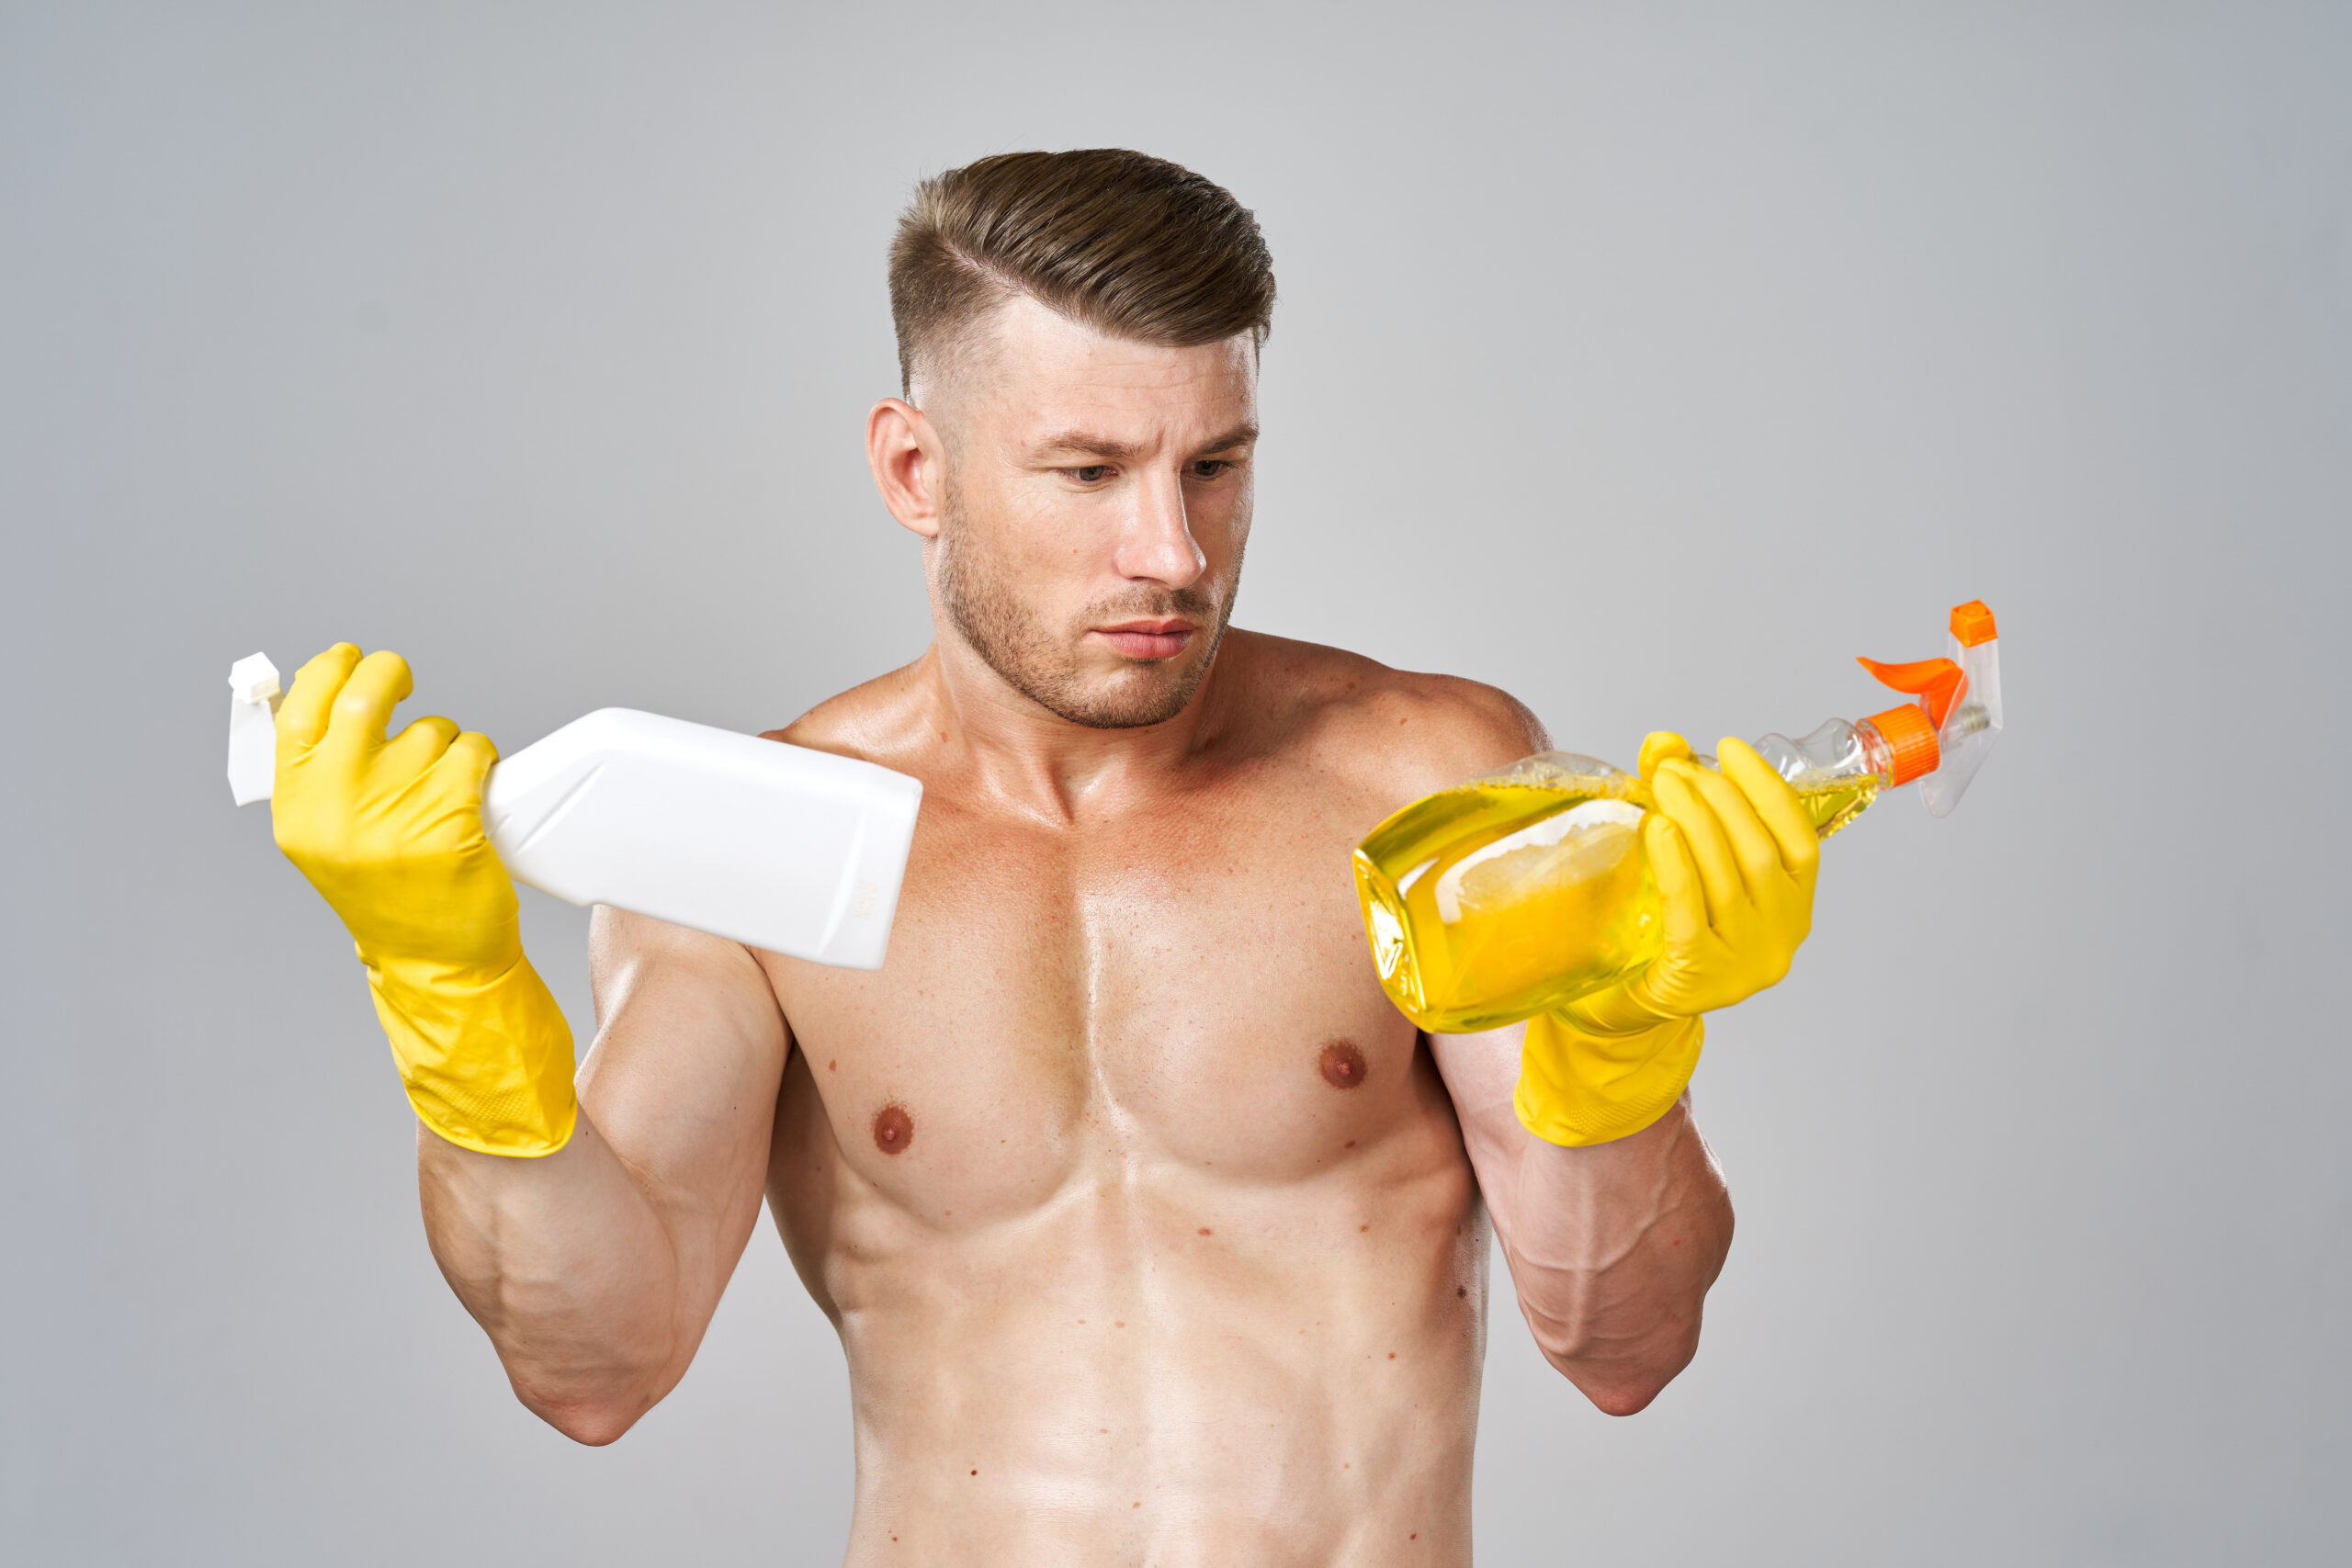 How to Clean Your Fleshlight (and Other Gay Sex Toys)